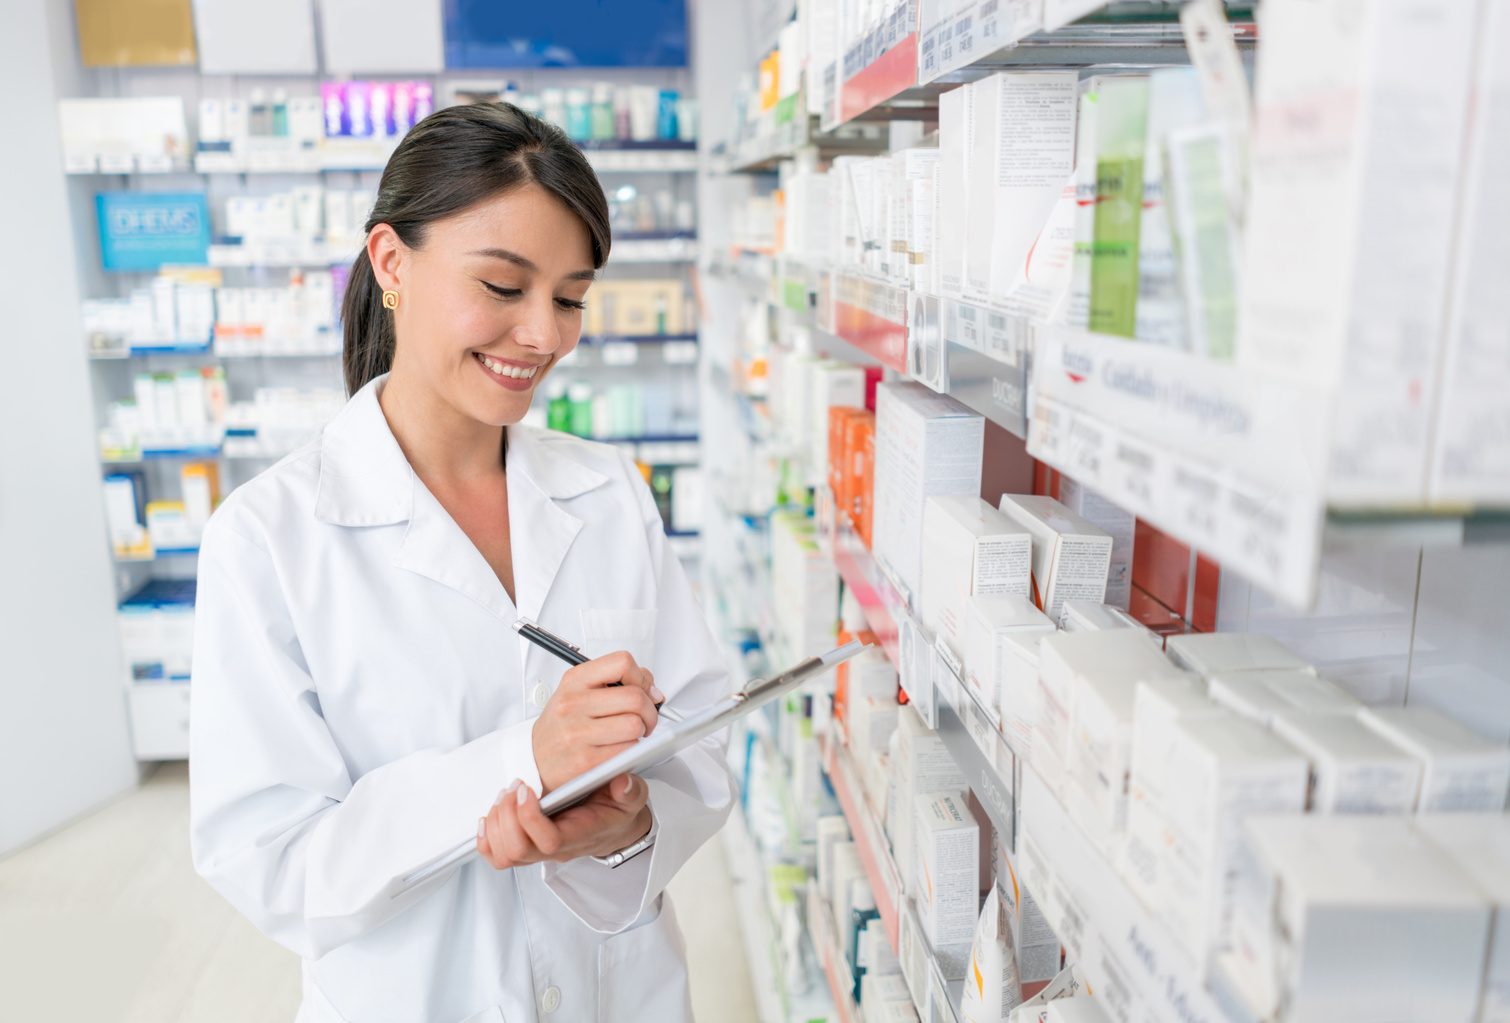 Pharmacist working at a drugstore